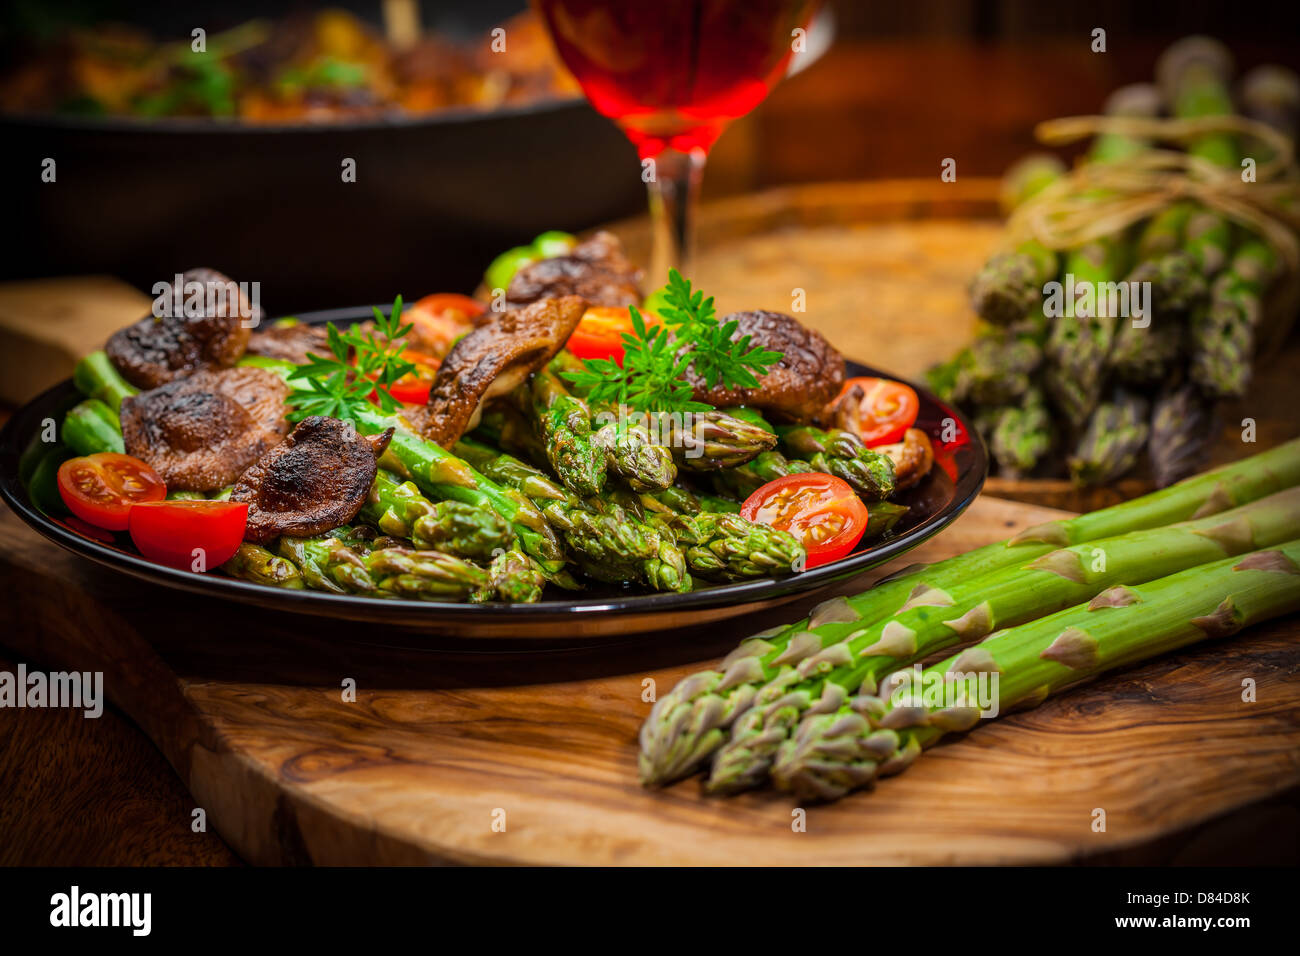 Roasted mushrooms with green asparagus Stock Photo